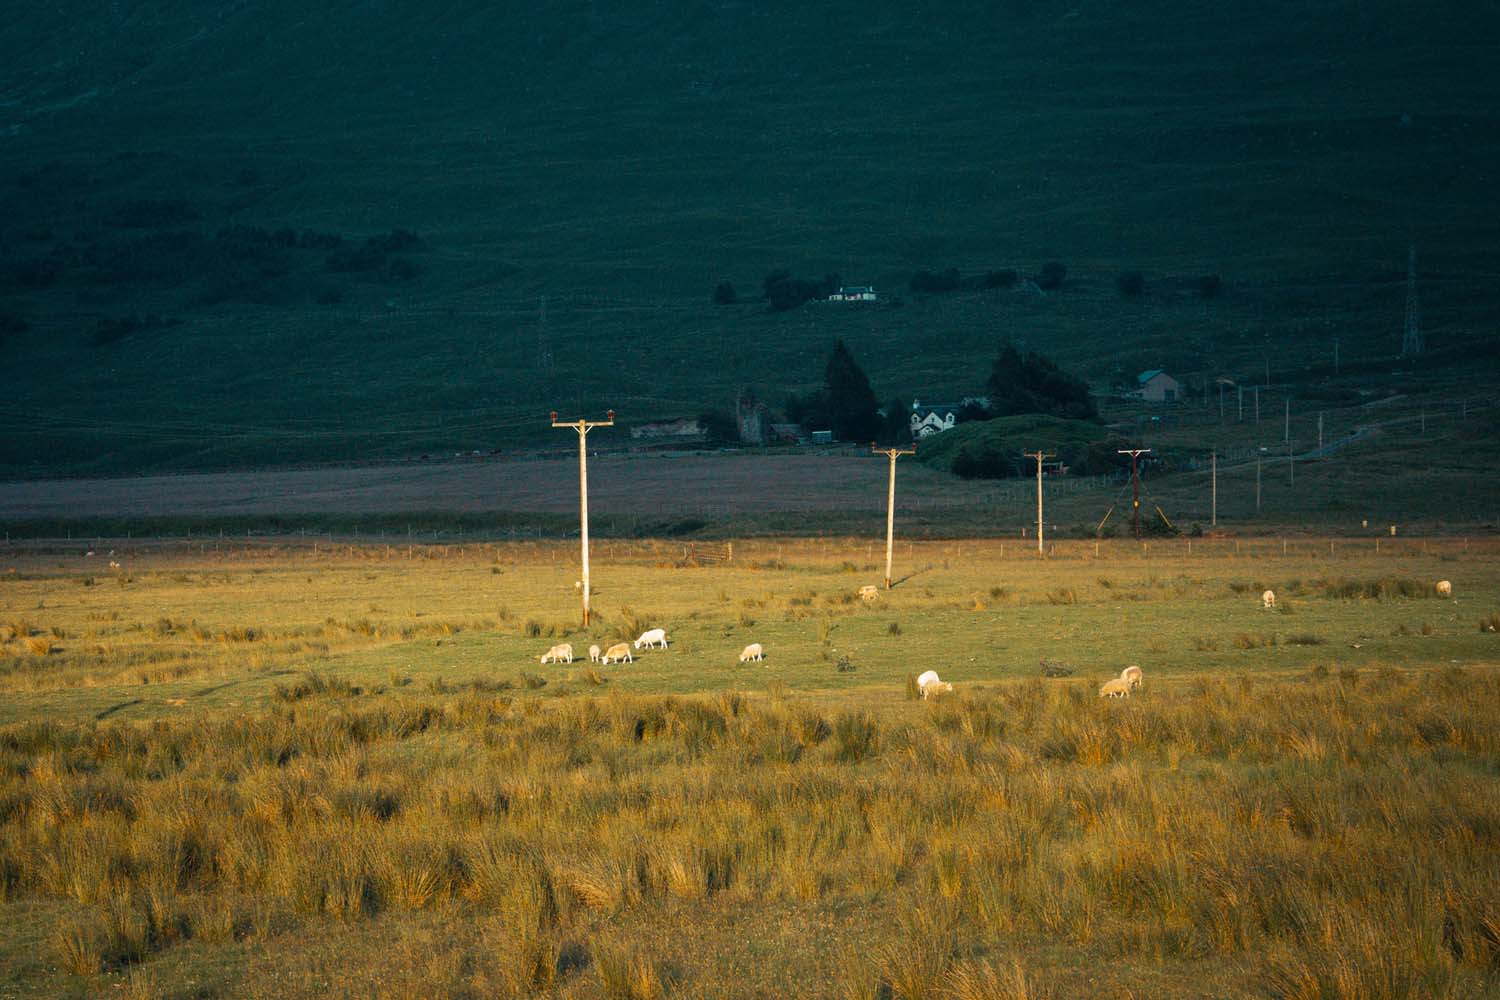 The sun shining on sheep grazing in a field under electricity pylons in Scotland.